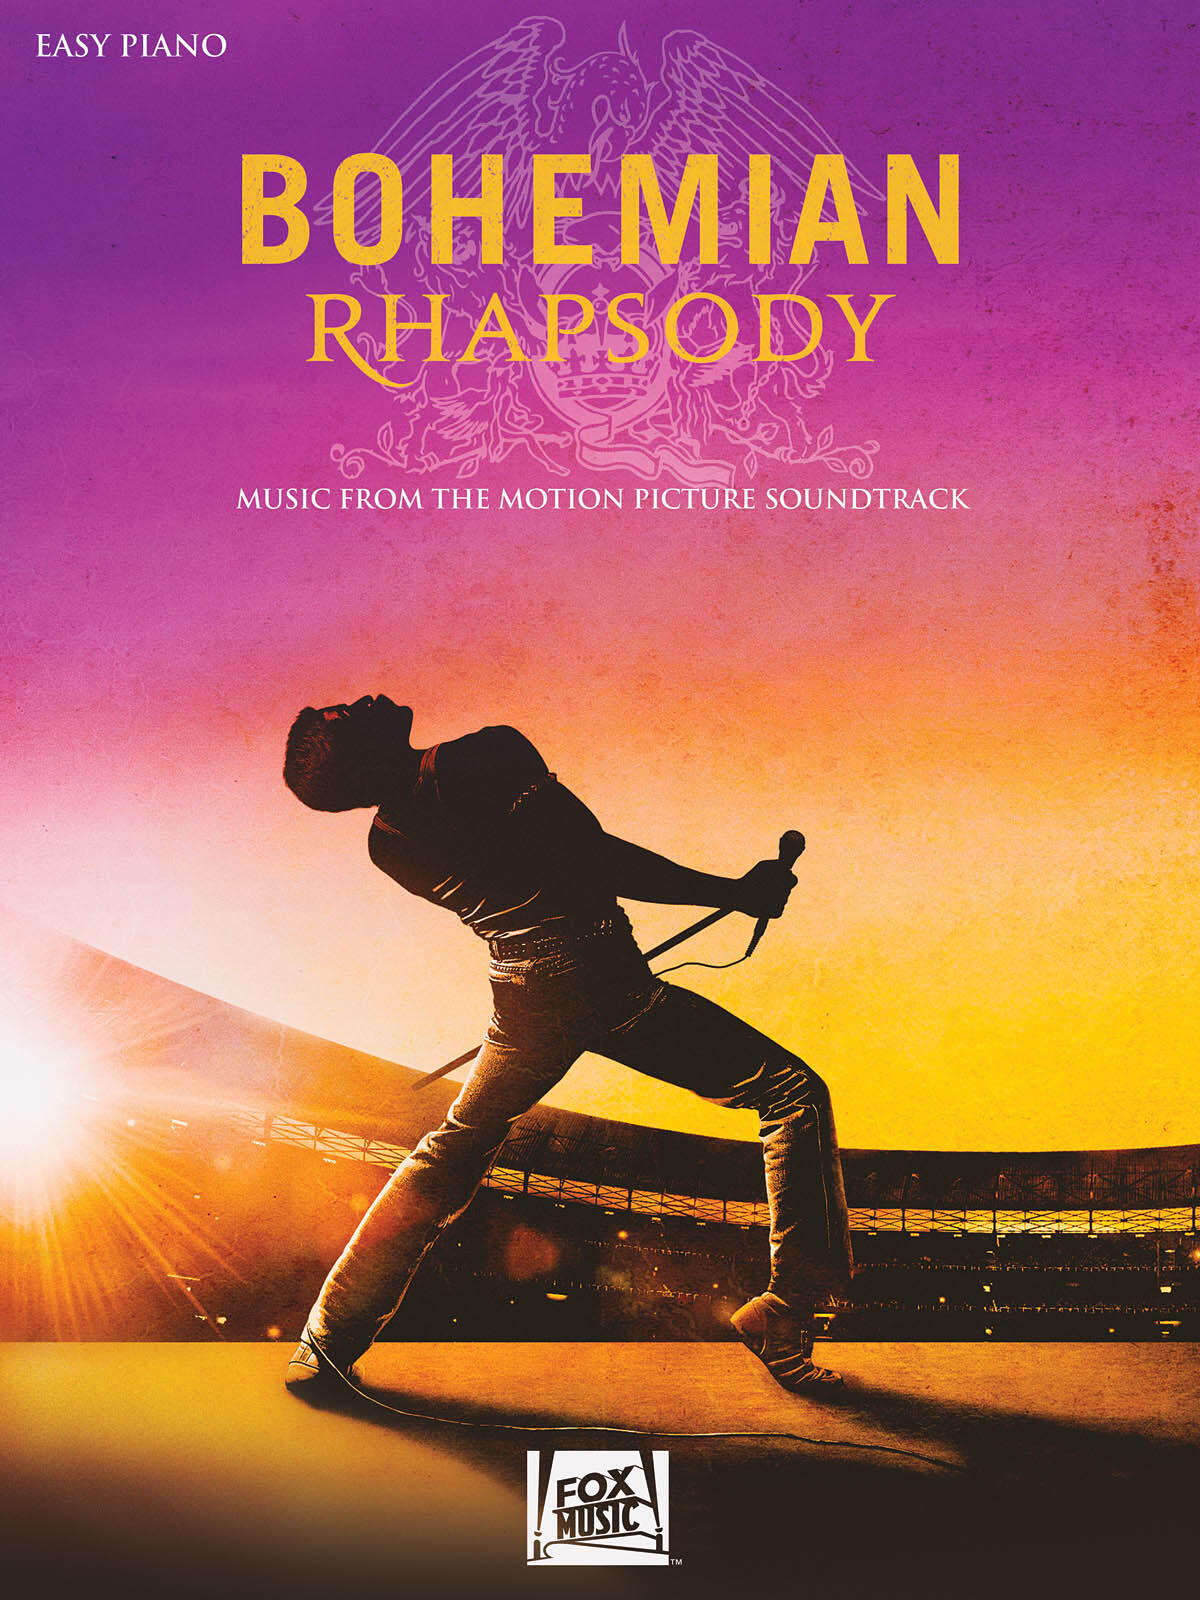 Hal Leonard Bohemian Rhapsody Music from the Motion Picture Soundtrack Piano facile : photo 1